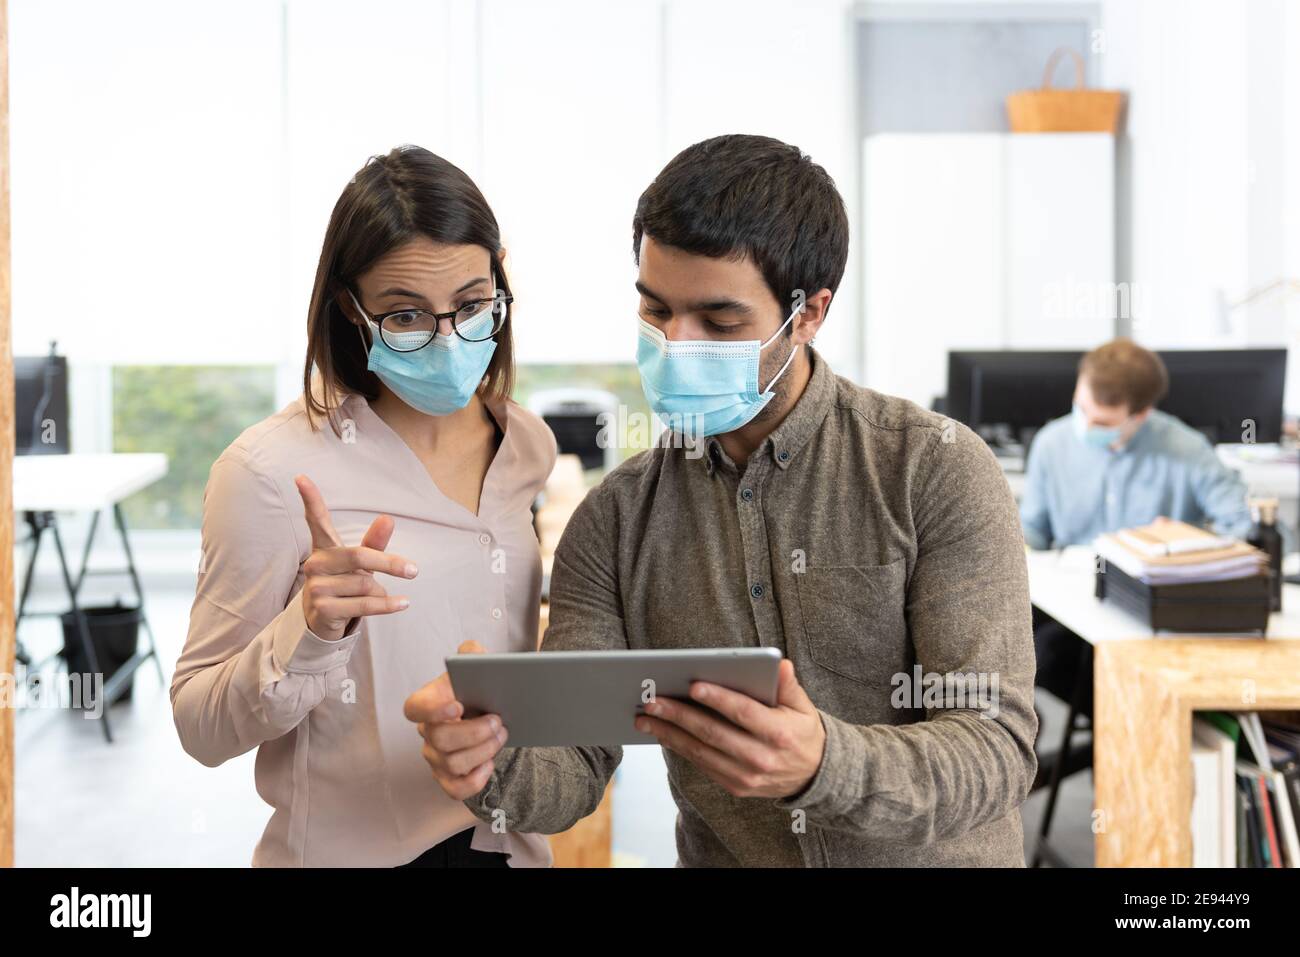 Hispanic man and woman wearing protective face masks chatting while looking a tablet. Working in the office during Coronavirus pandemic concept. Stock Photo